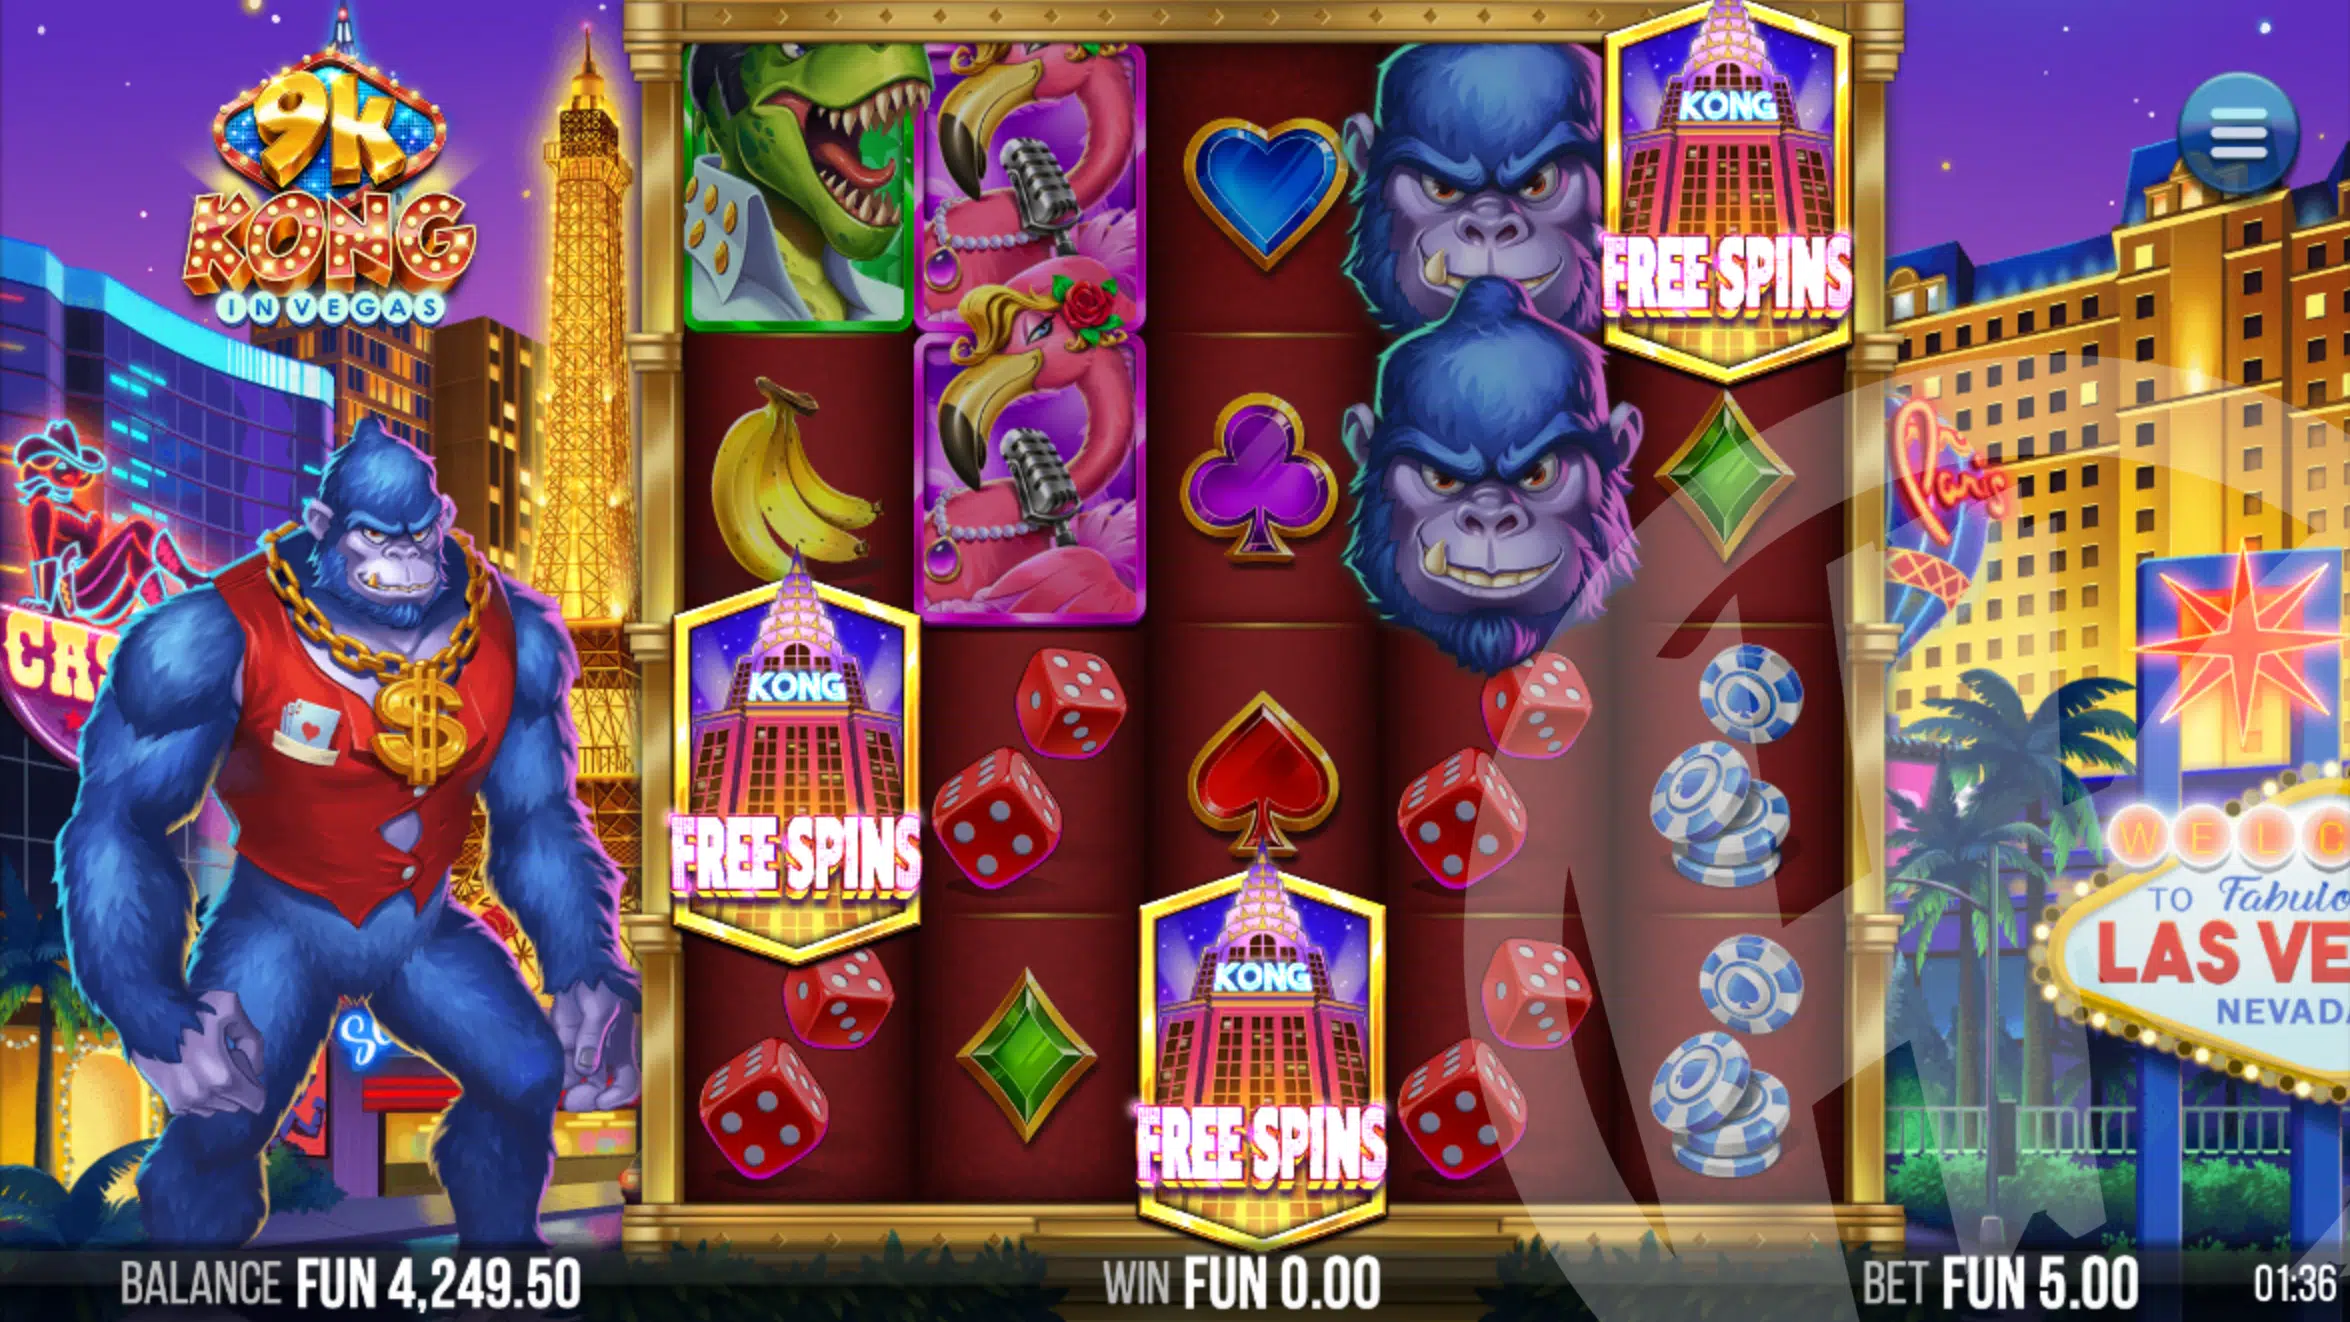 3 Scatters Trigger 10 Free Spins